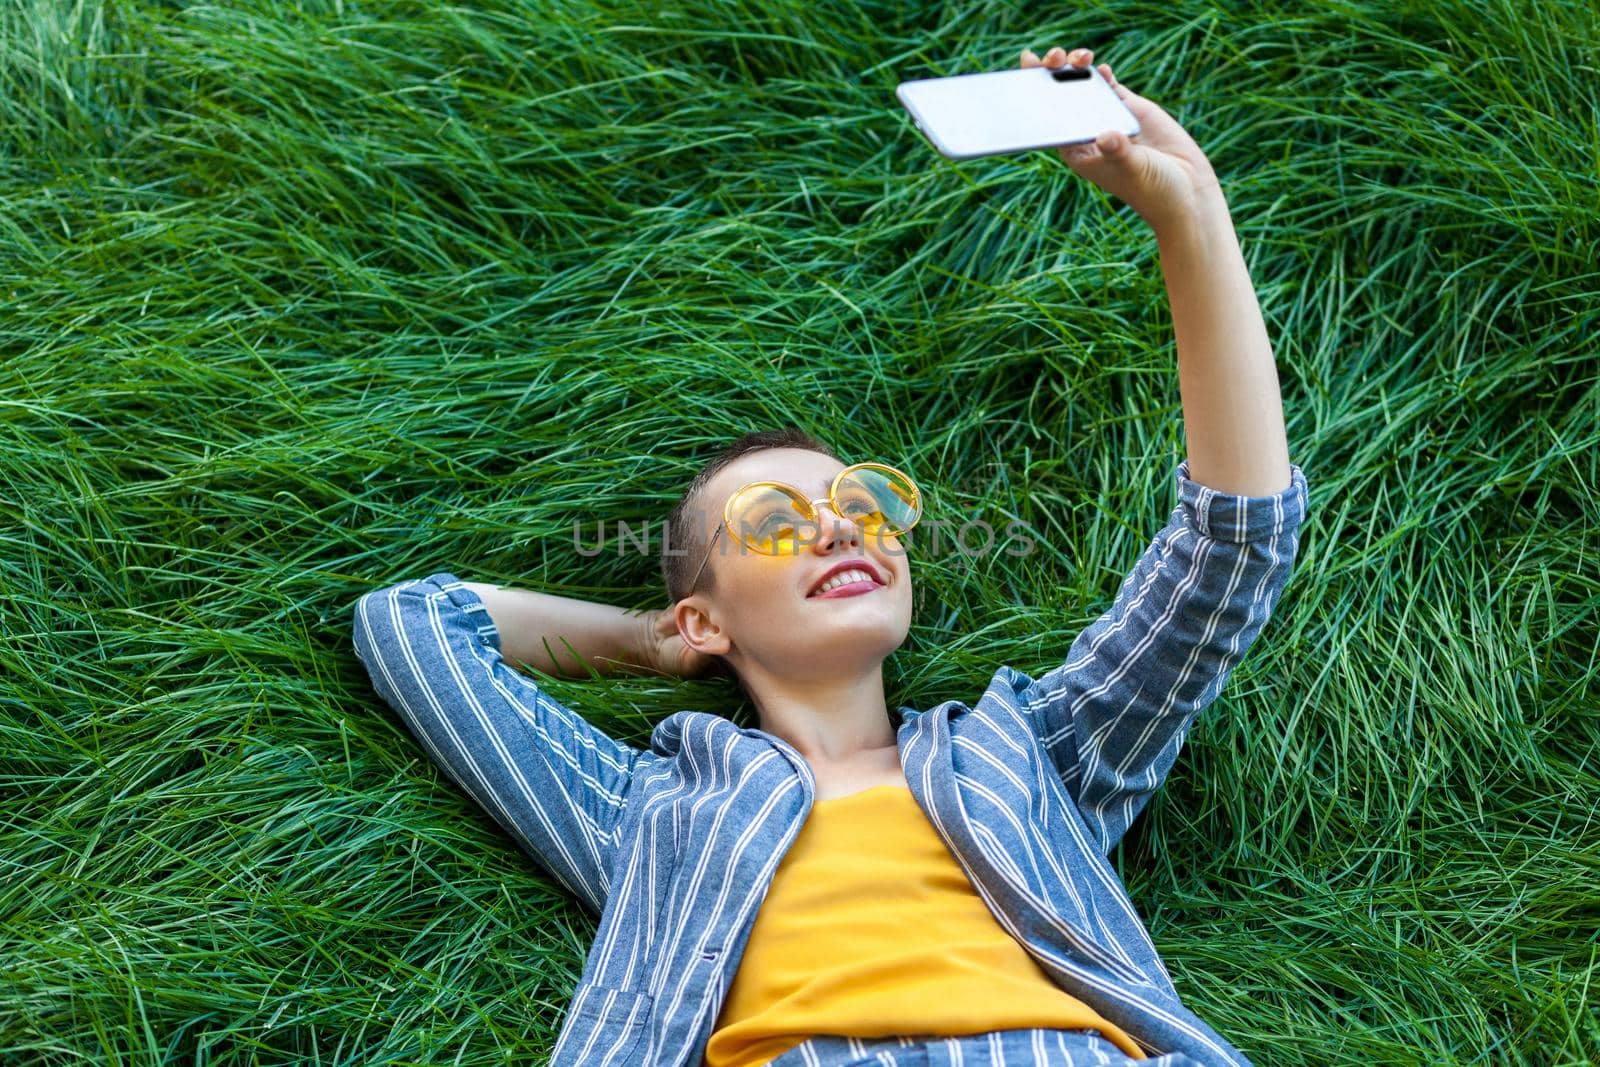 Portrait of smiley young short hair woman in casual blue striped suit, yellow shirt, glasses lying down on green grass holding her mobile phone, doing selfie or online video. outdoor summertime shot.